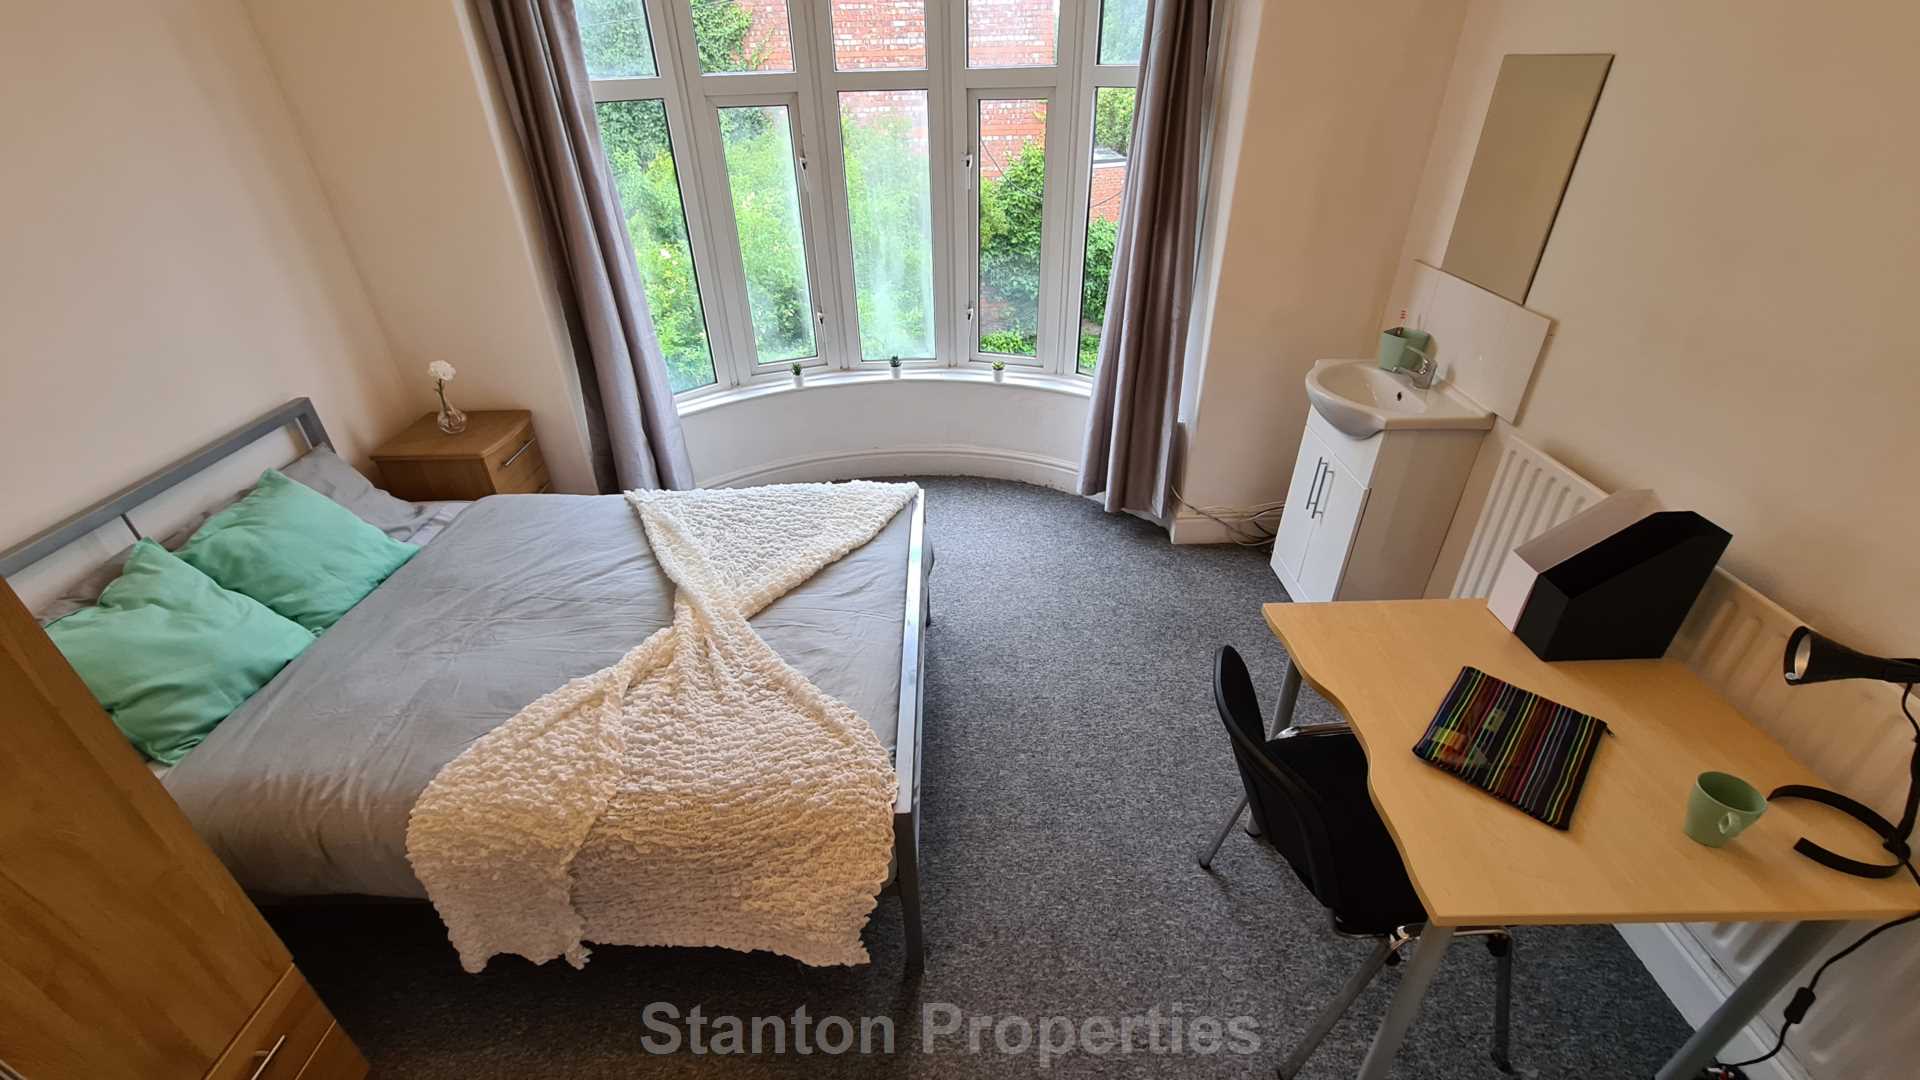 £145 pppw, See Video Tour, Wellington Road, Fallowfield, Image 24